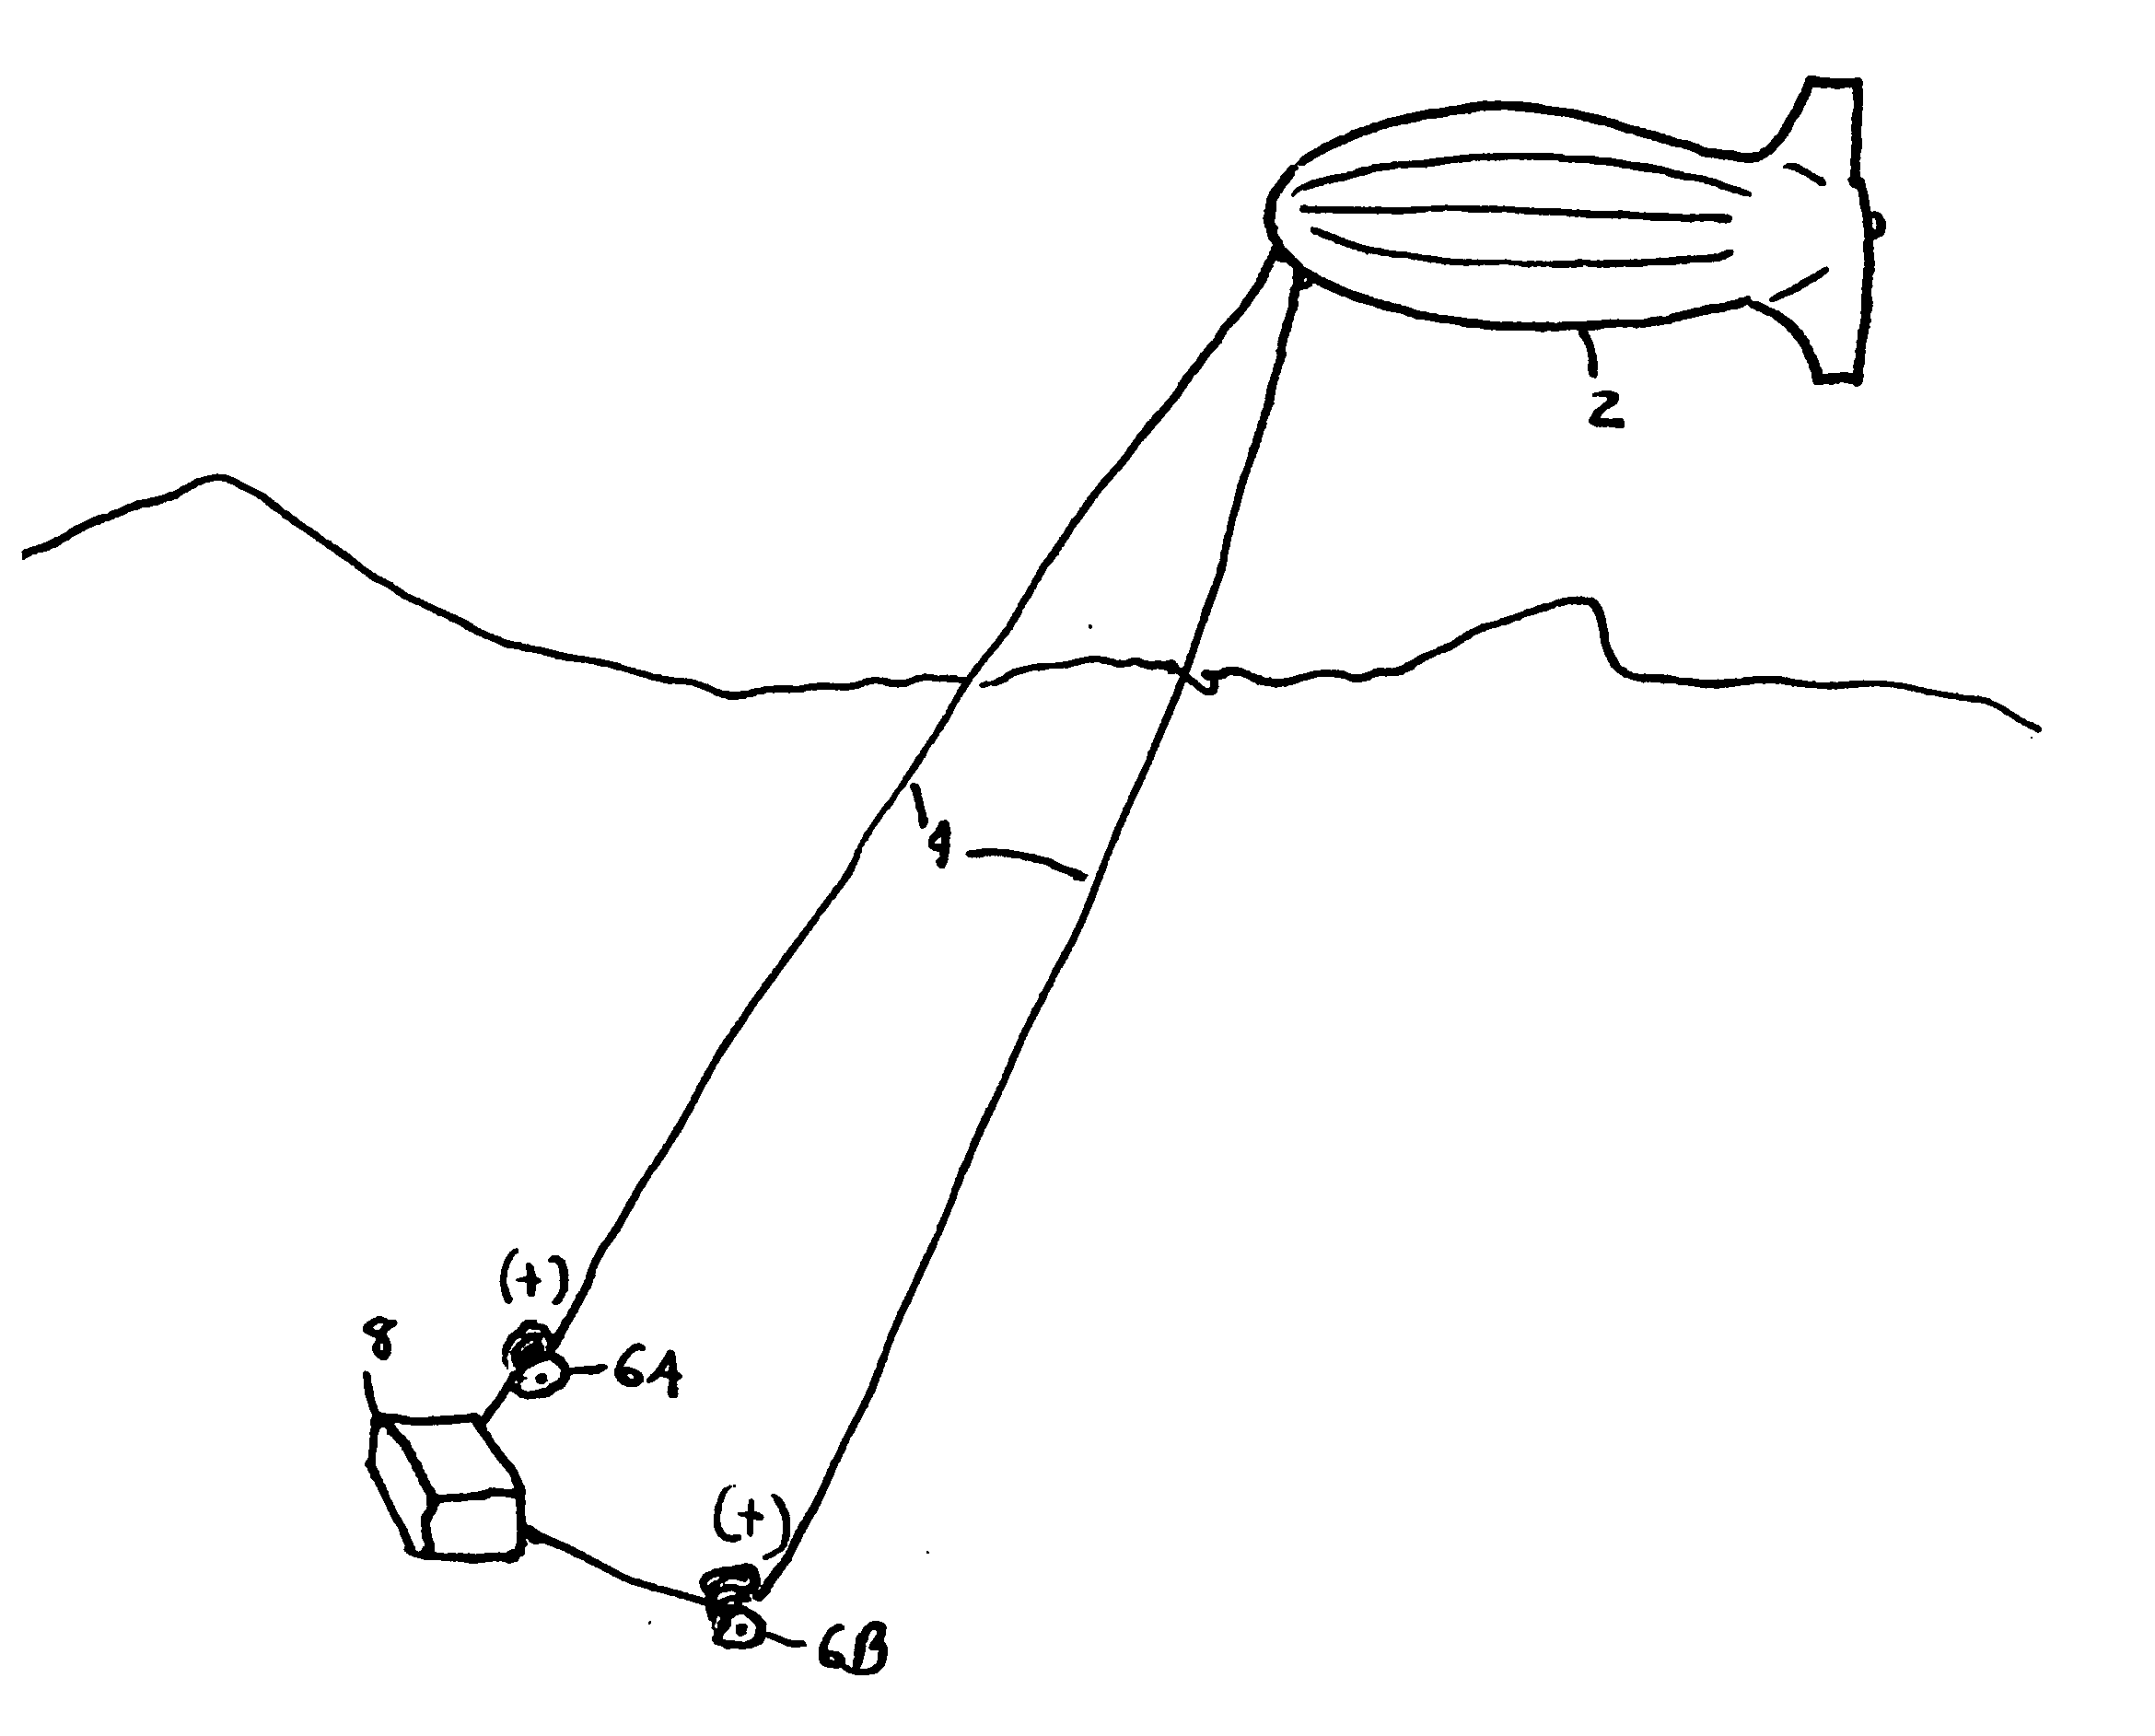 Method of scavenging atmospheric energy, causing rainfall, and for dissipating severe weather formations using an electrostatic dirigible